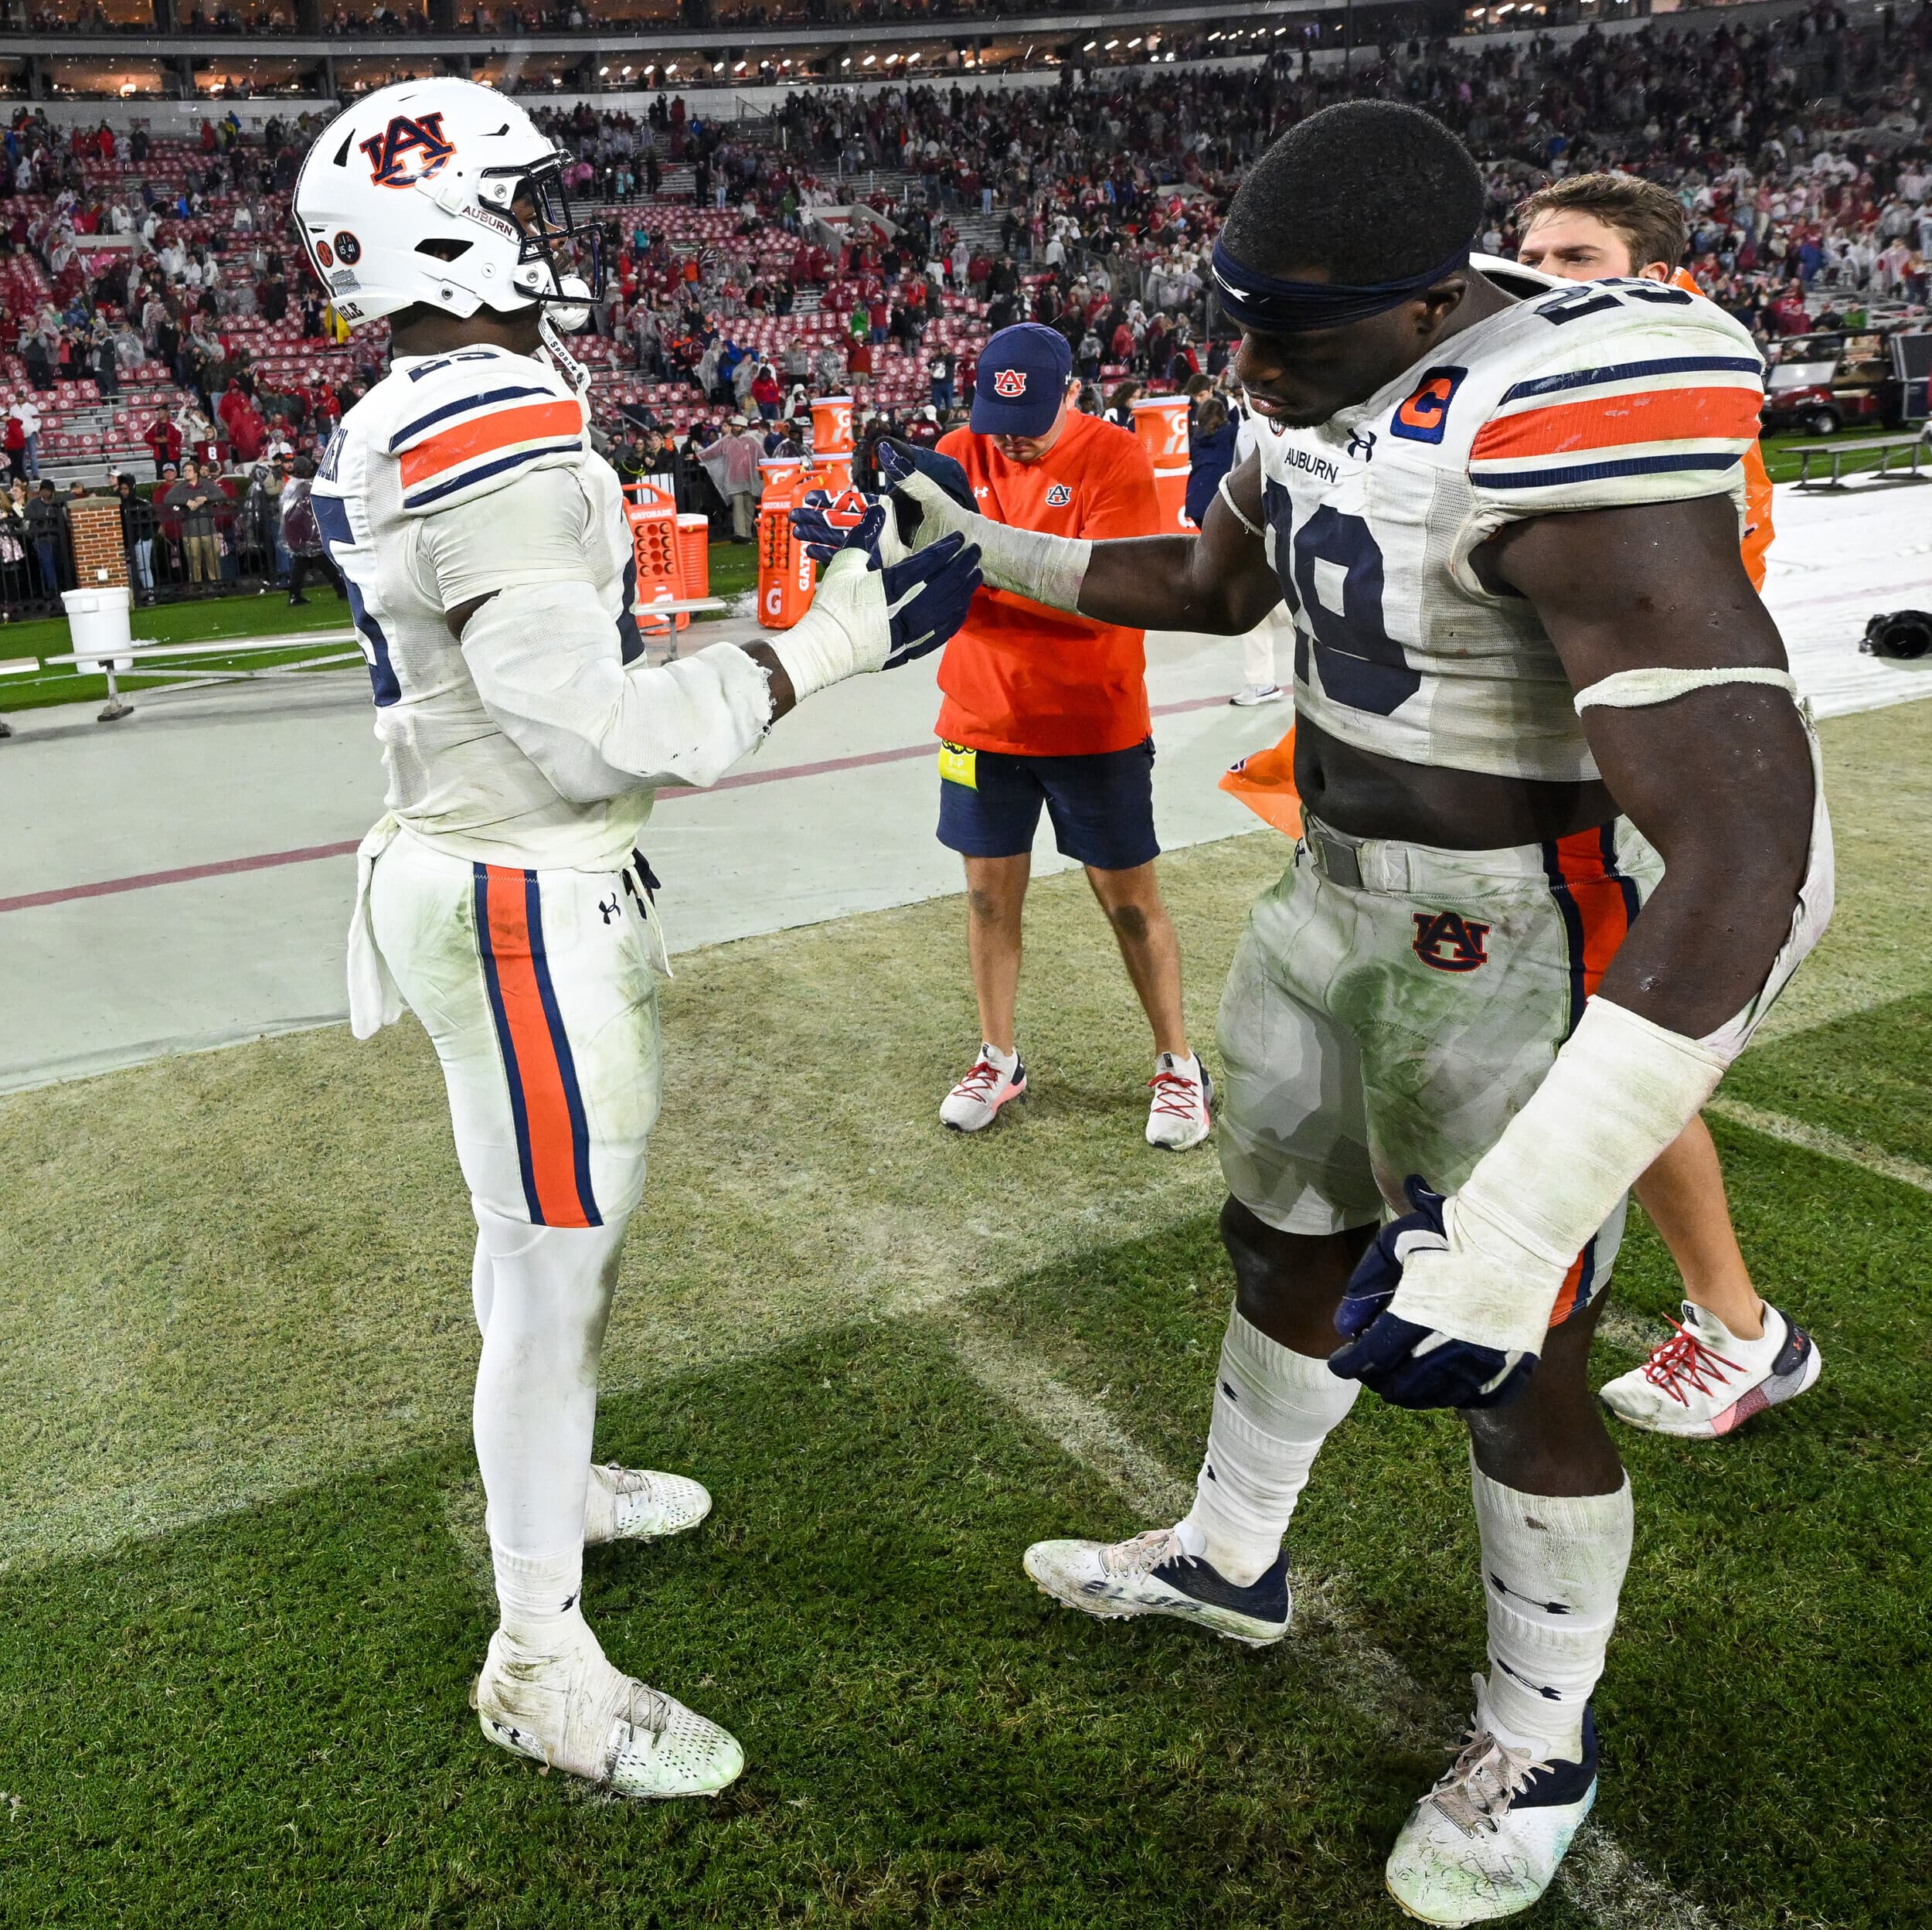 Colby Wooden (25) and Derick Hall (29) share a moment after the game. Auburn vs Alabama  on Saturday, Nov. 26, 2022 in Tuscaloosa, Ala. Todd Van Emst/AU Athletics